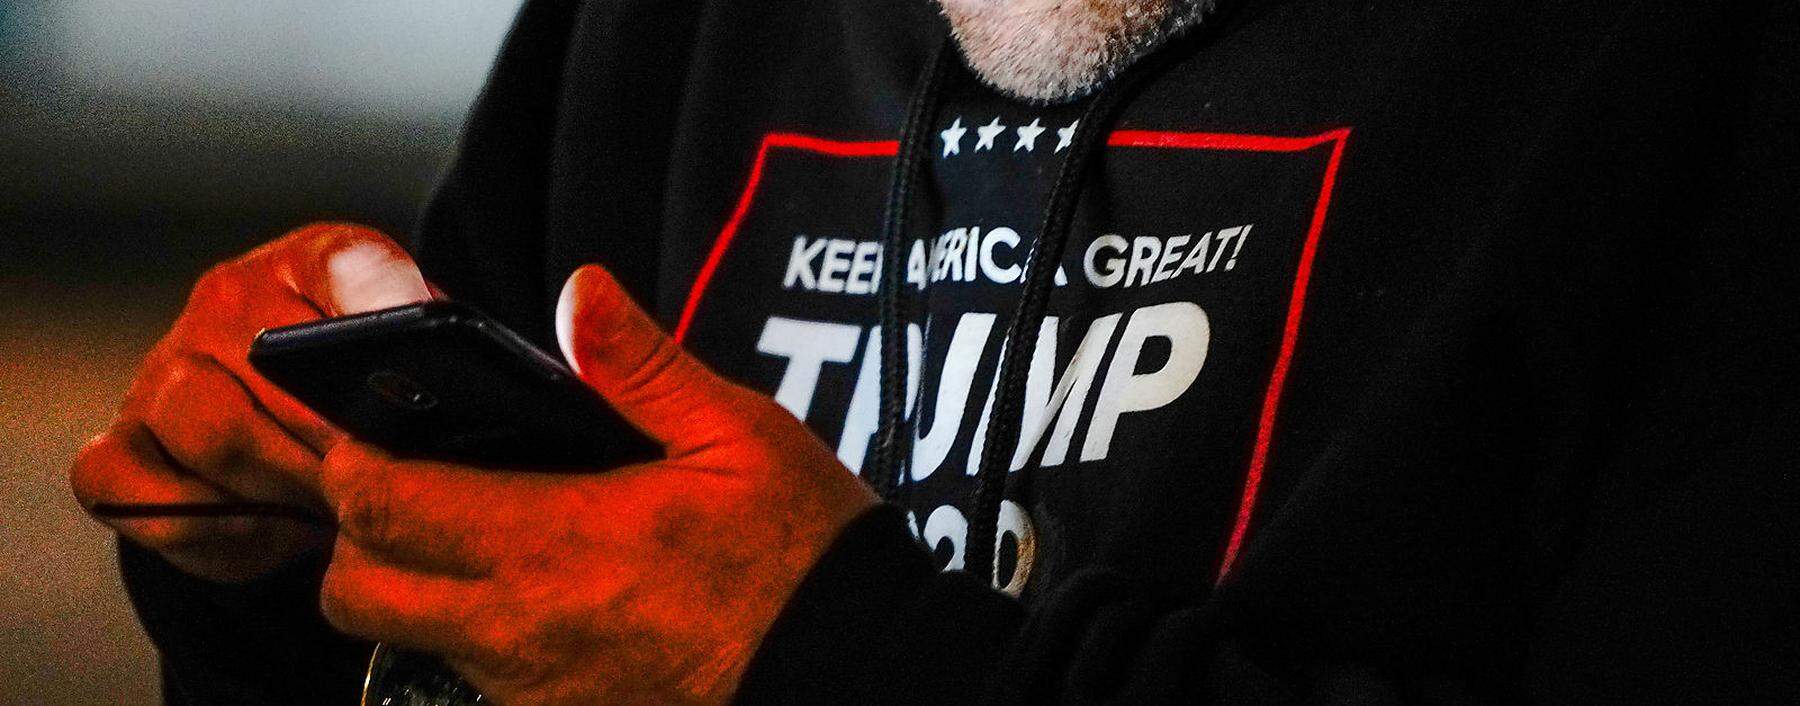 FILE PHOTO: A man wearing a 'Trump 2020' sweatshirt uses his mobile phone during a 'Stop the Steal' protest outside Milwaukee Central Count the day after Milwaukee County finished counting absentee ballots, in Milwaukee